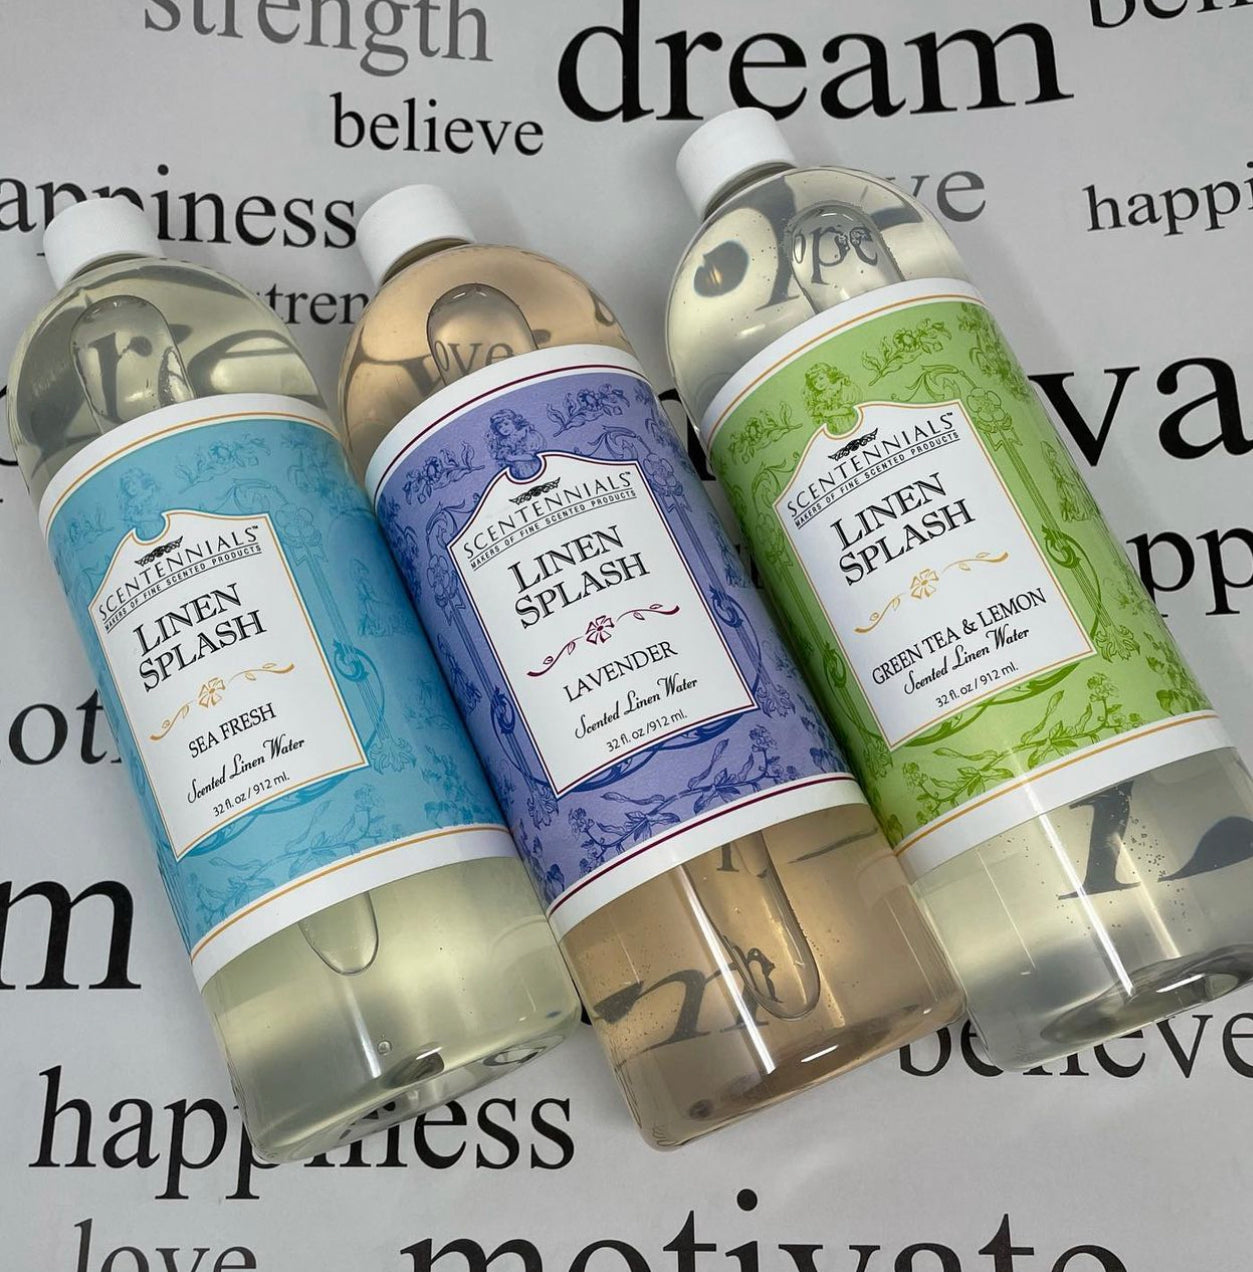 Floral Scented Linen Spray